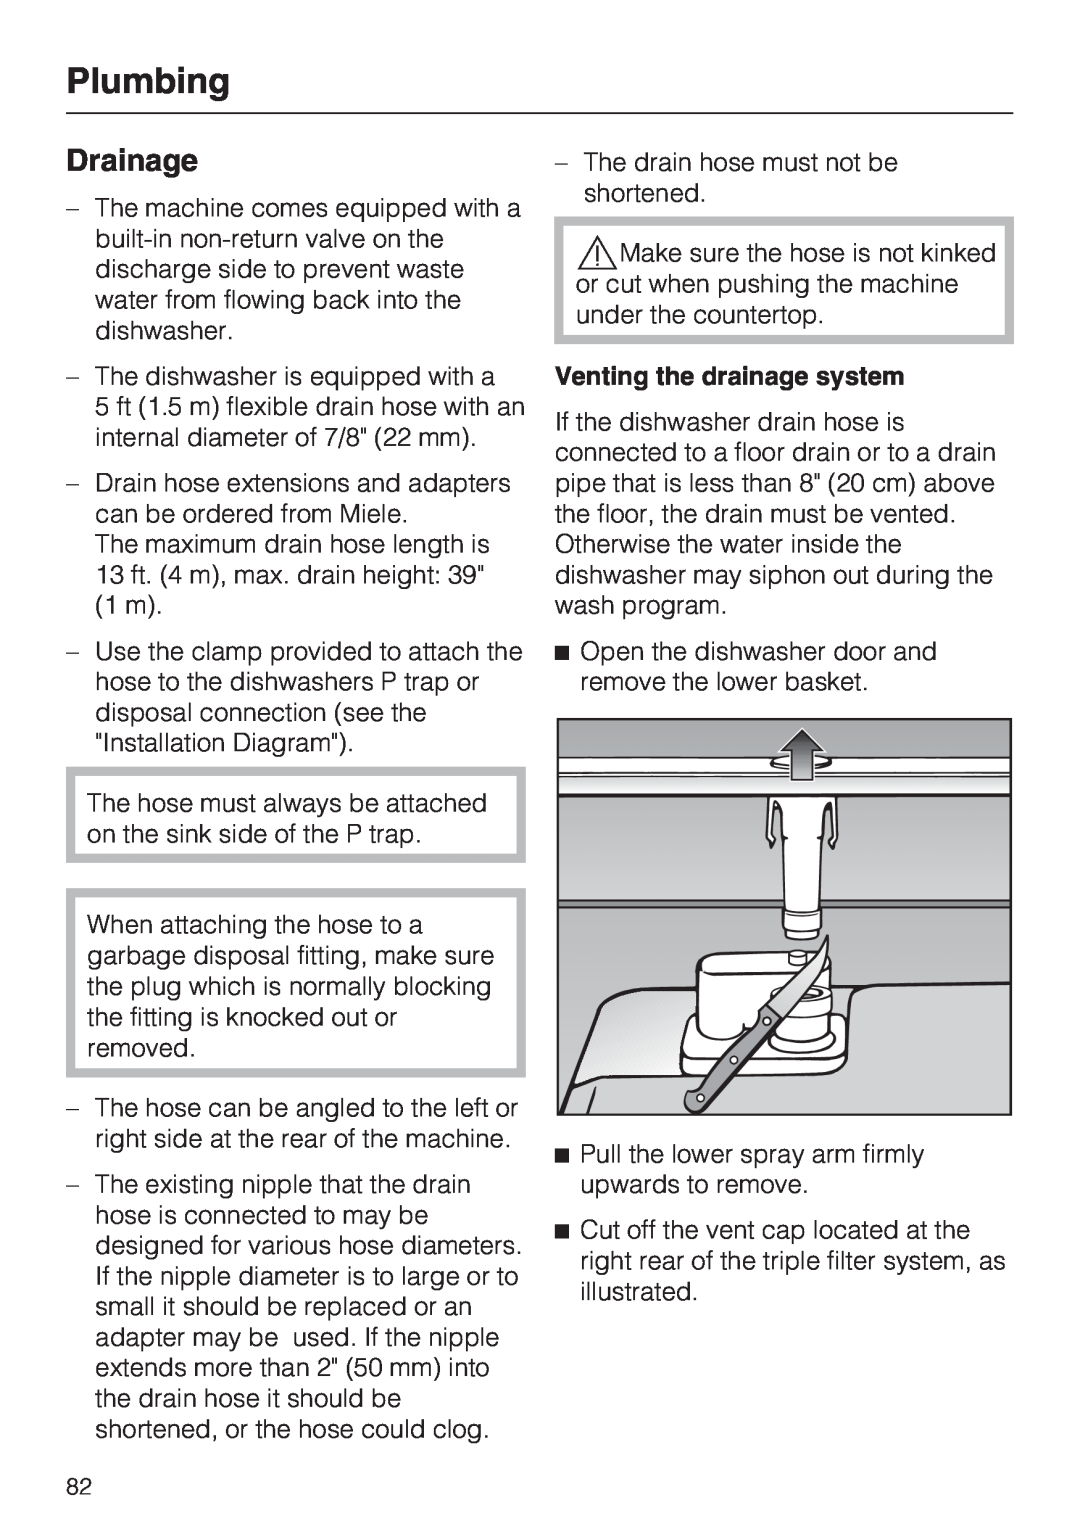 Miele G 5915, G 5910 operating instructions Drainage, Plumbing, Venting the drainage system 